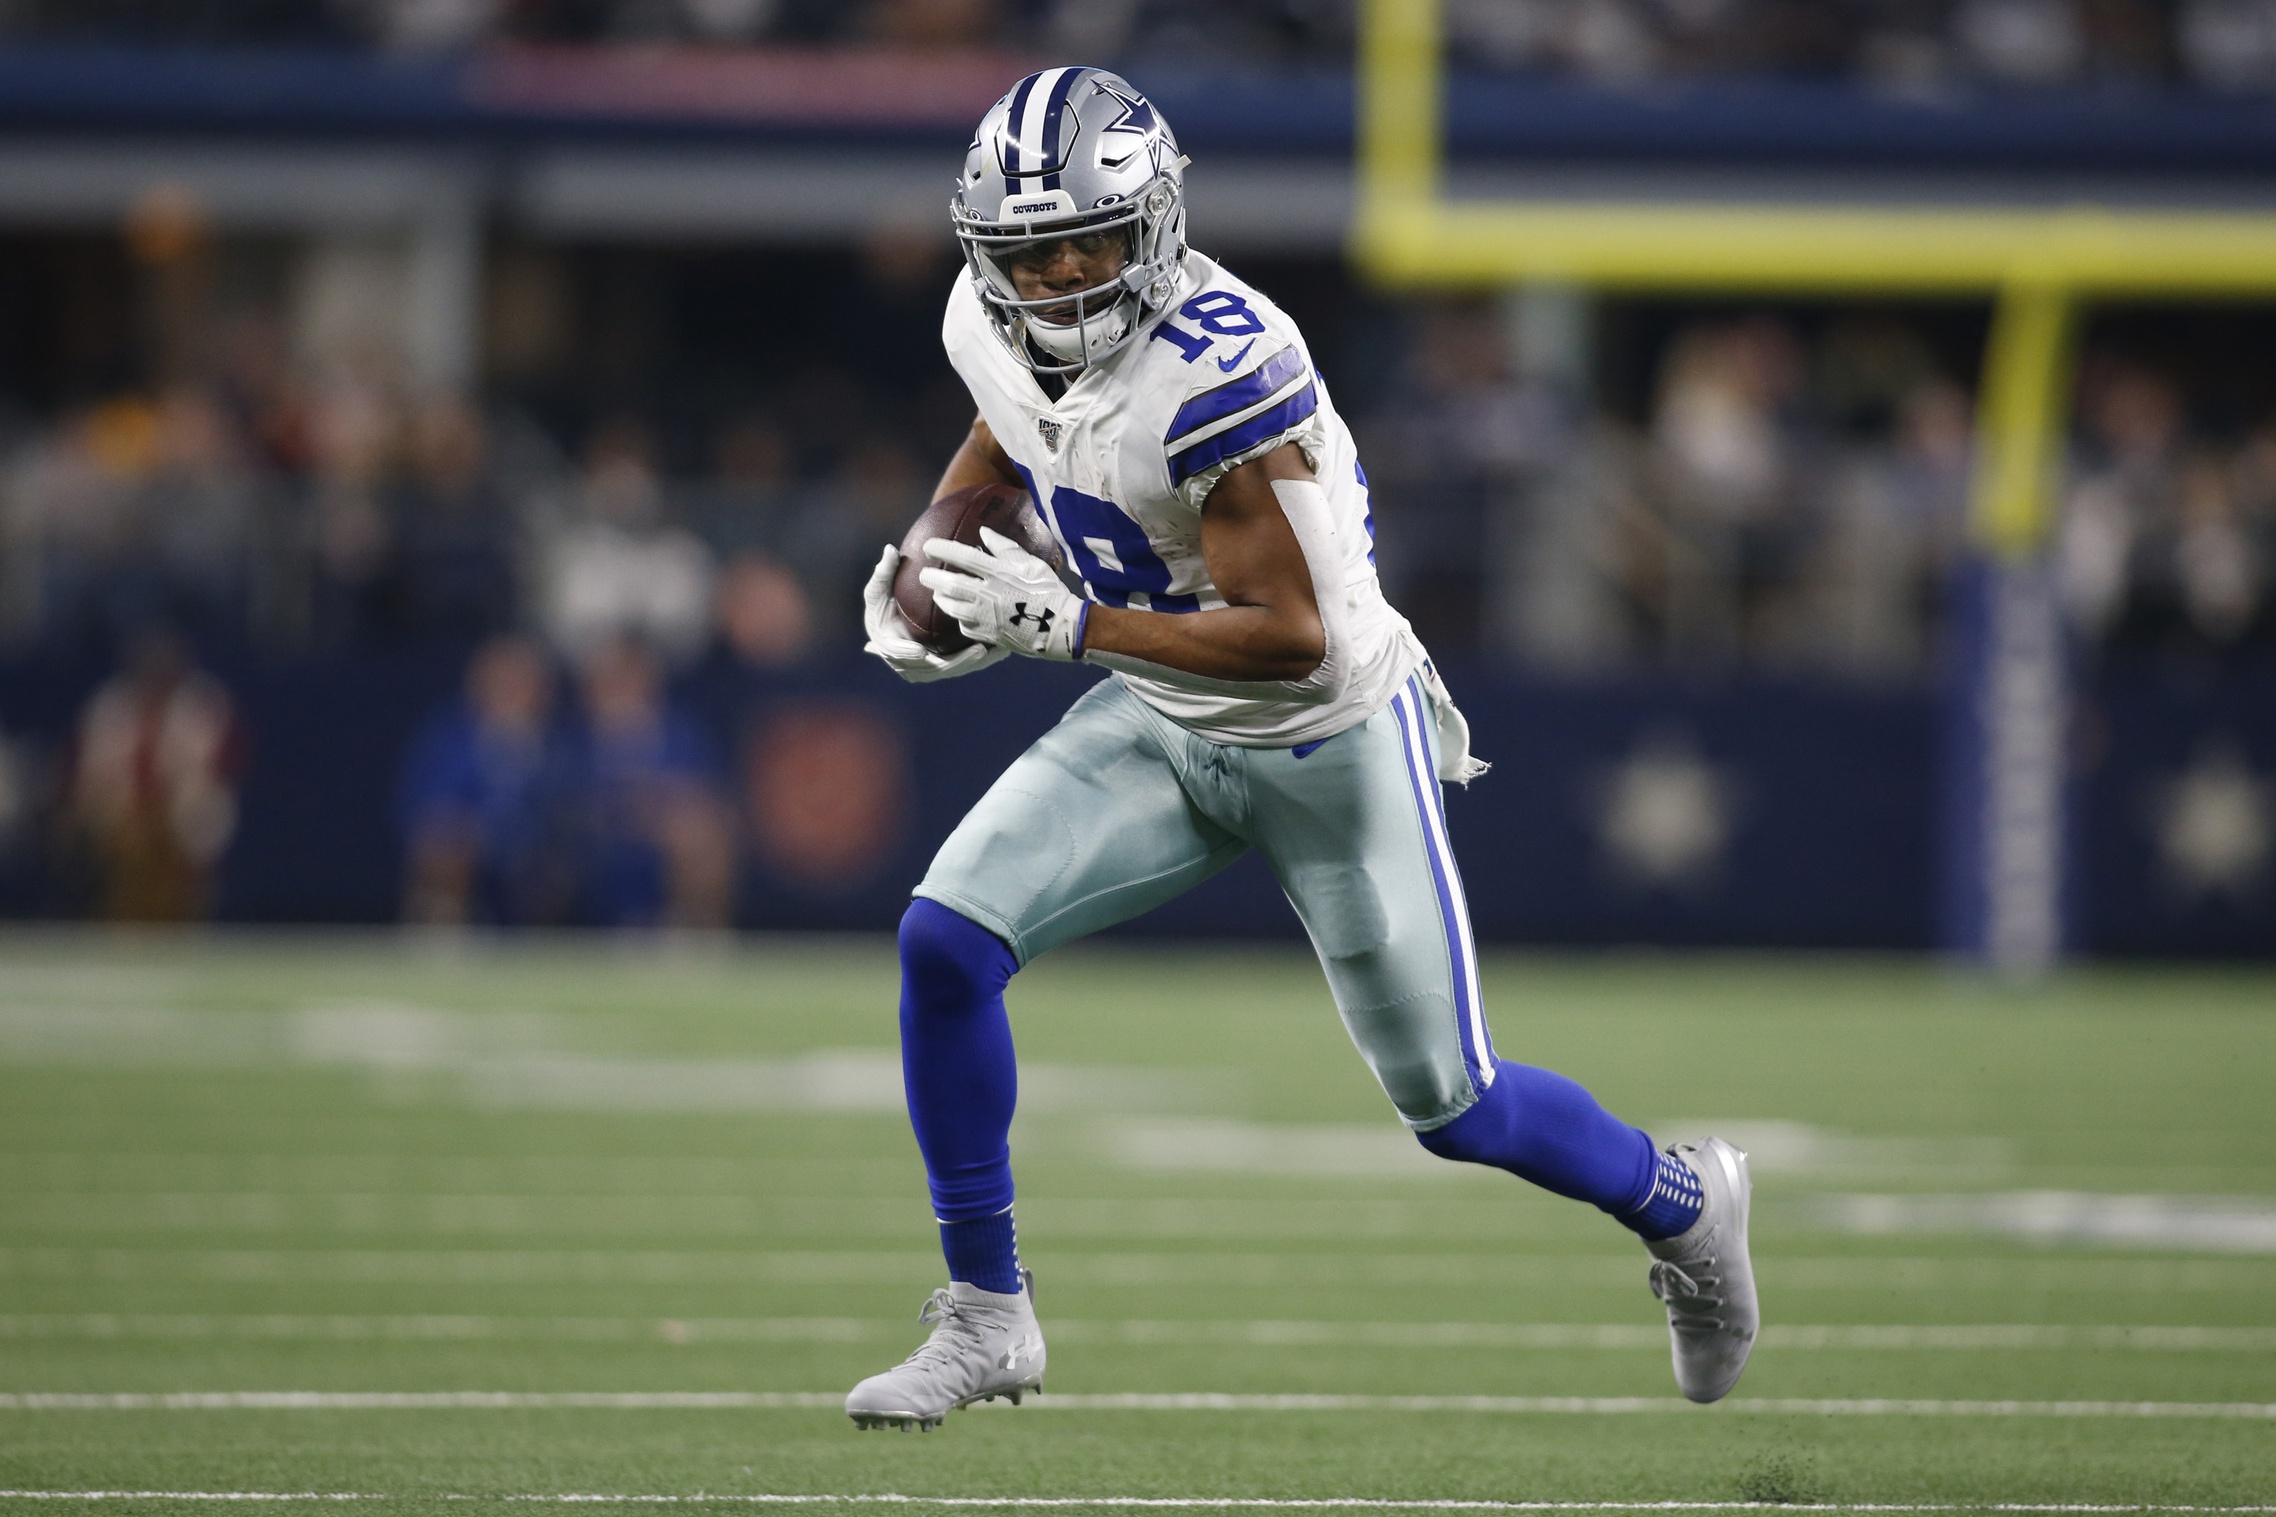 Dec 29, 2019; Arlington, Texas, USA; Dallas Cowboys wide receiver Randall Cobb (18) runs the ball after catching a pass in the third quarter against the Washington Redskins at AT&T Stadium. Mandatory Credit: Tim Heitman-USA TODAY Sports